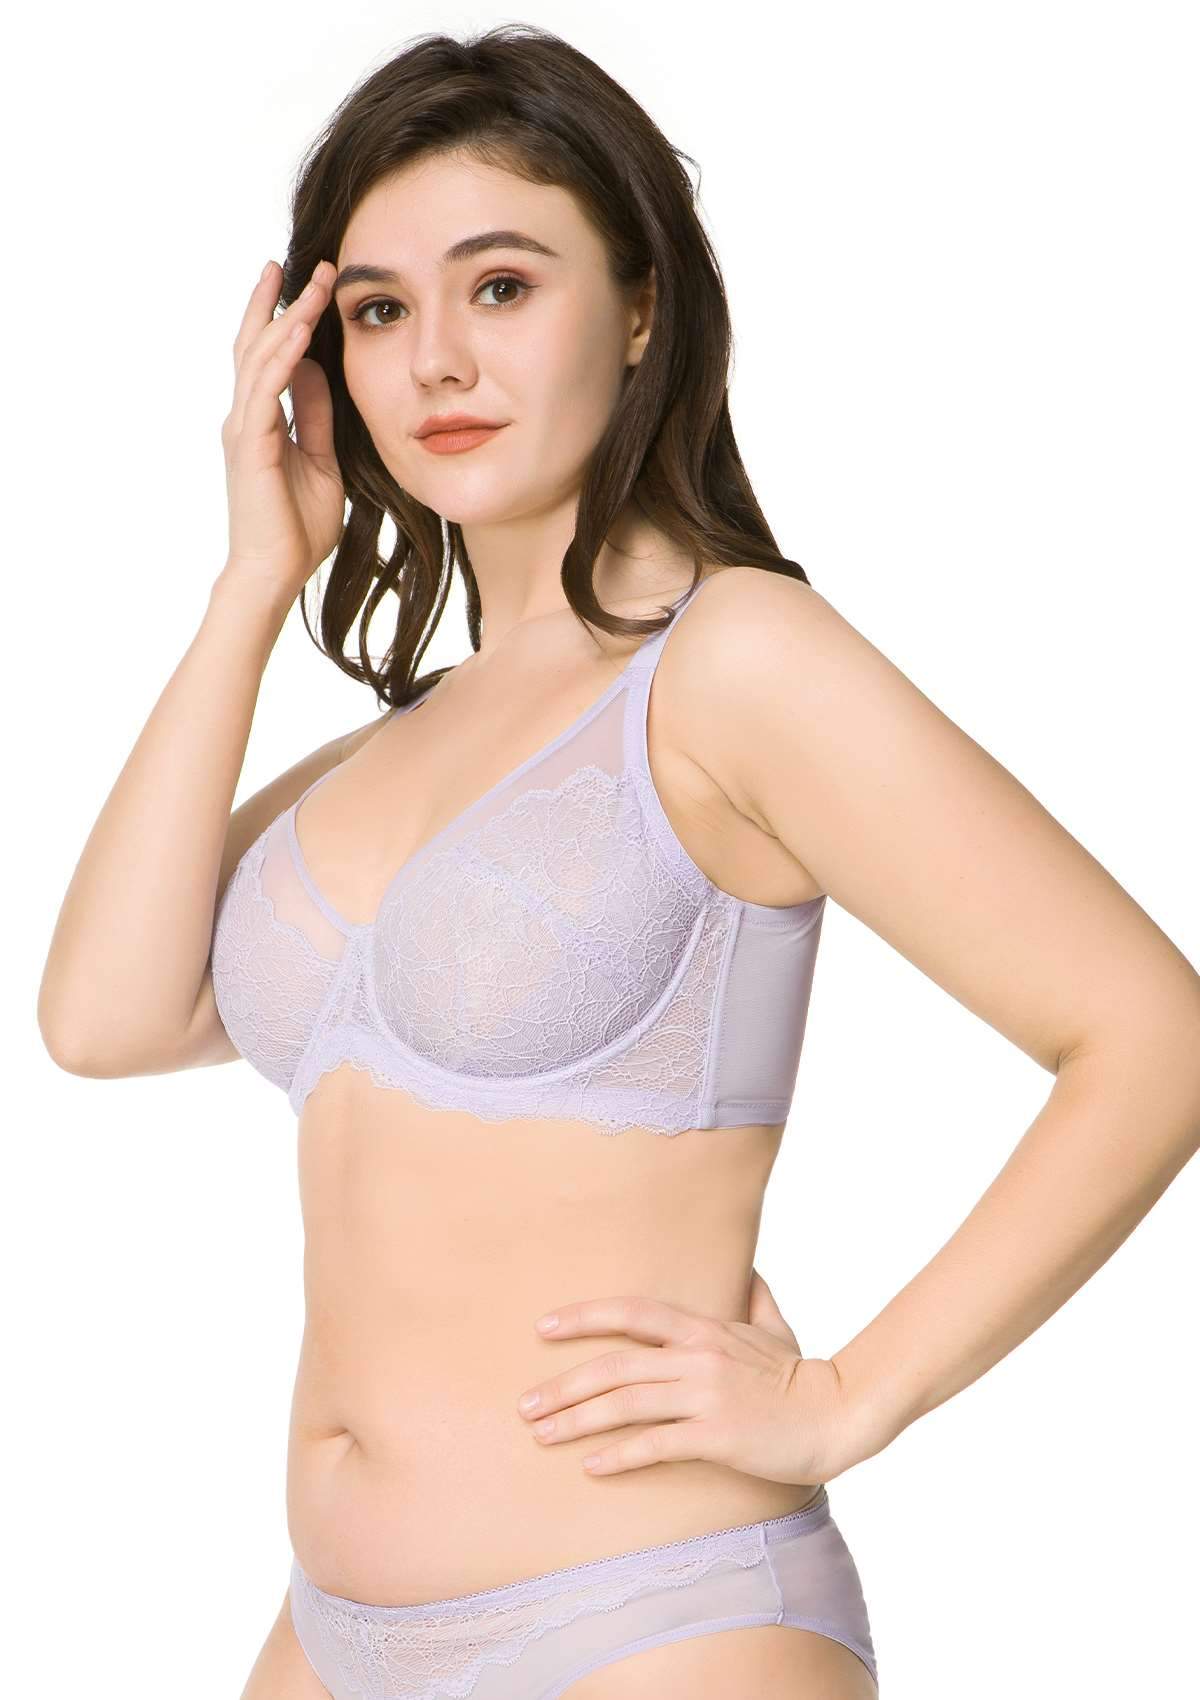 HSIA Wisteria Bra For Lift And Support - Full Coverage Minimizer Bra - Light Pink / 42 / D